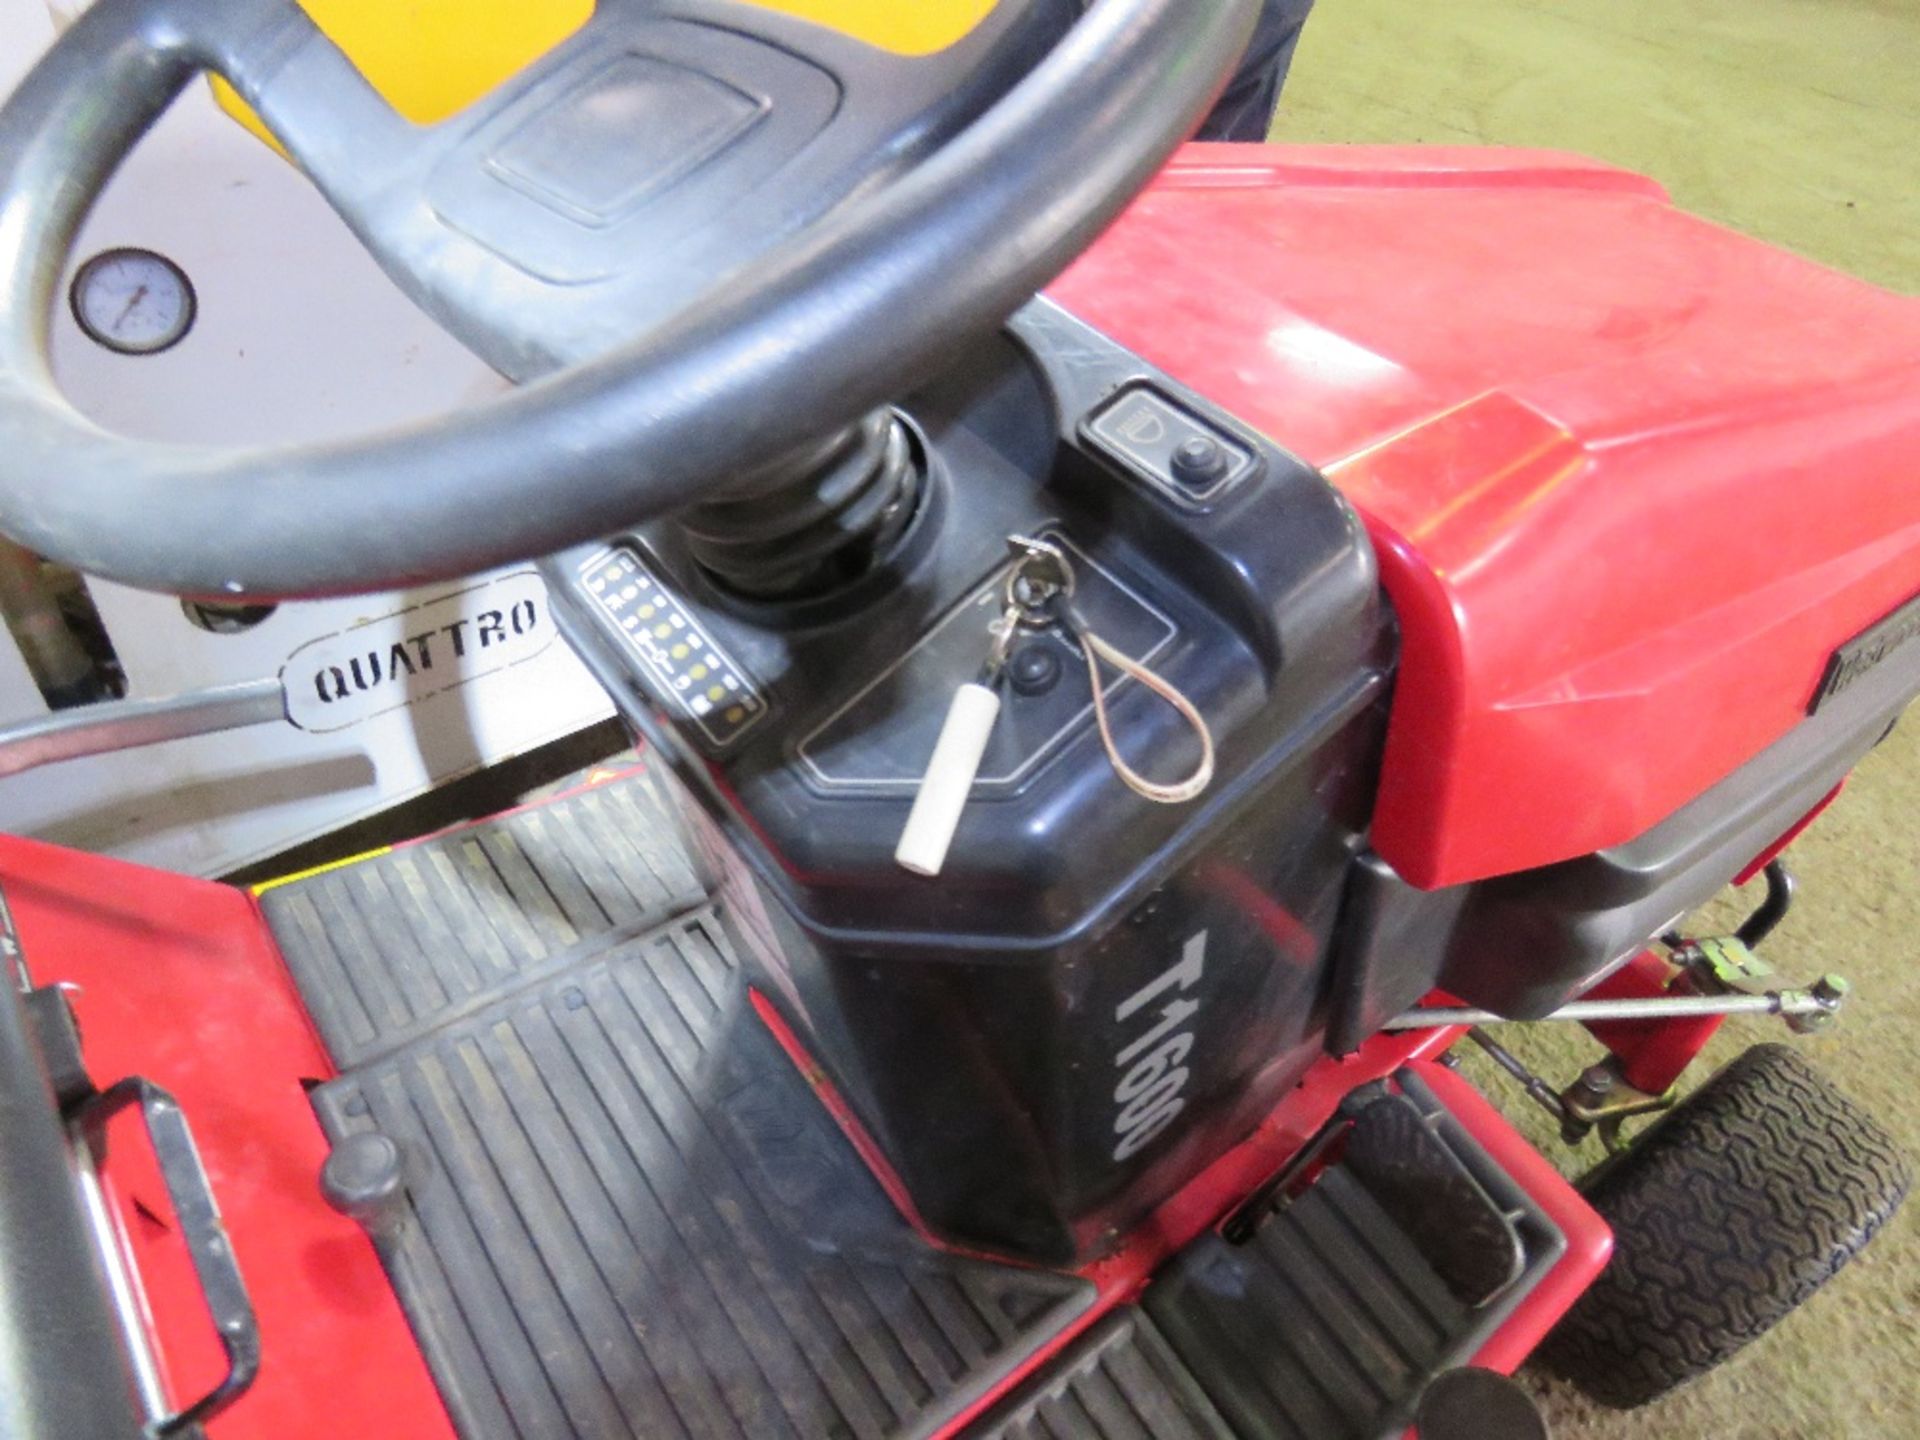 WESTWOOD T1600 HYDRO RIDE ON MOWER WITH COLLECTOR. WHEN TESTED WAS SEEN TO RUN, DRIVE, AND BLADES TU - Image 3 of 5